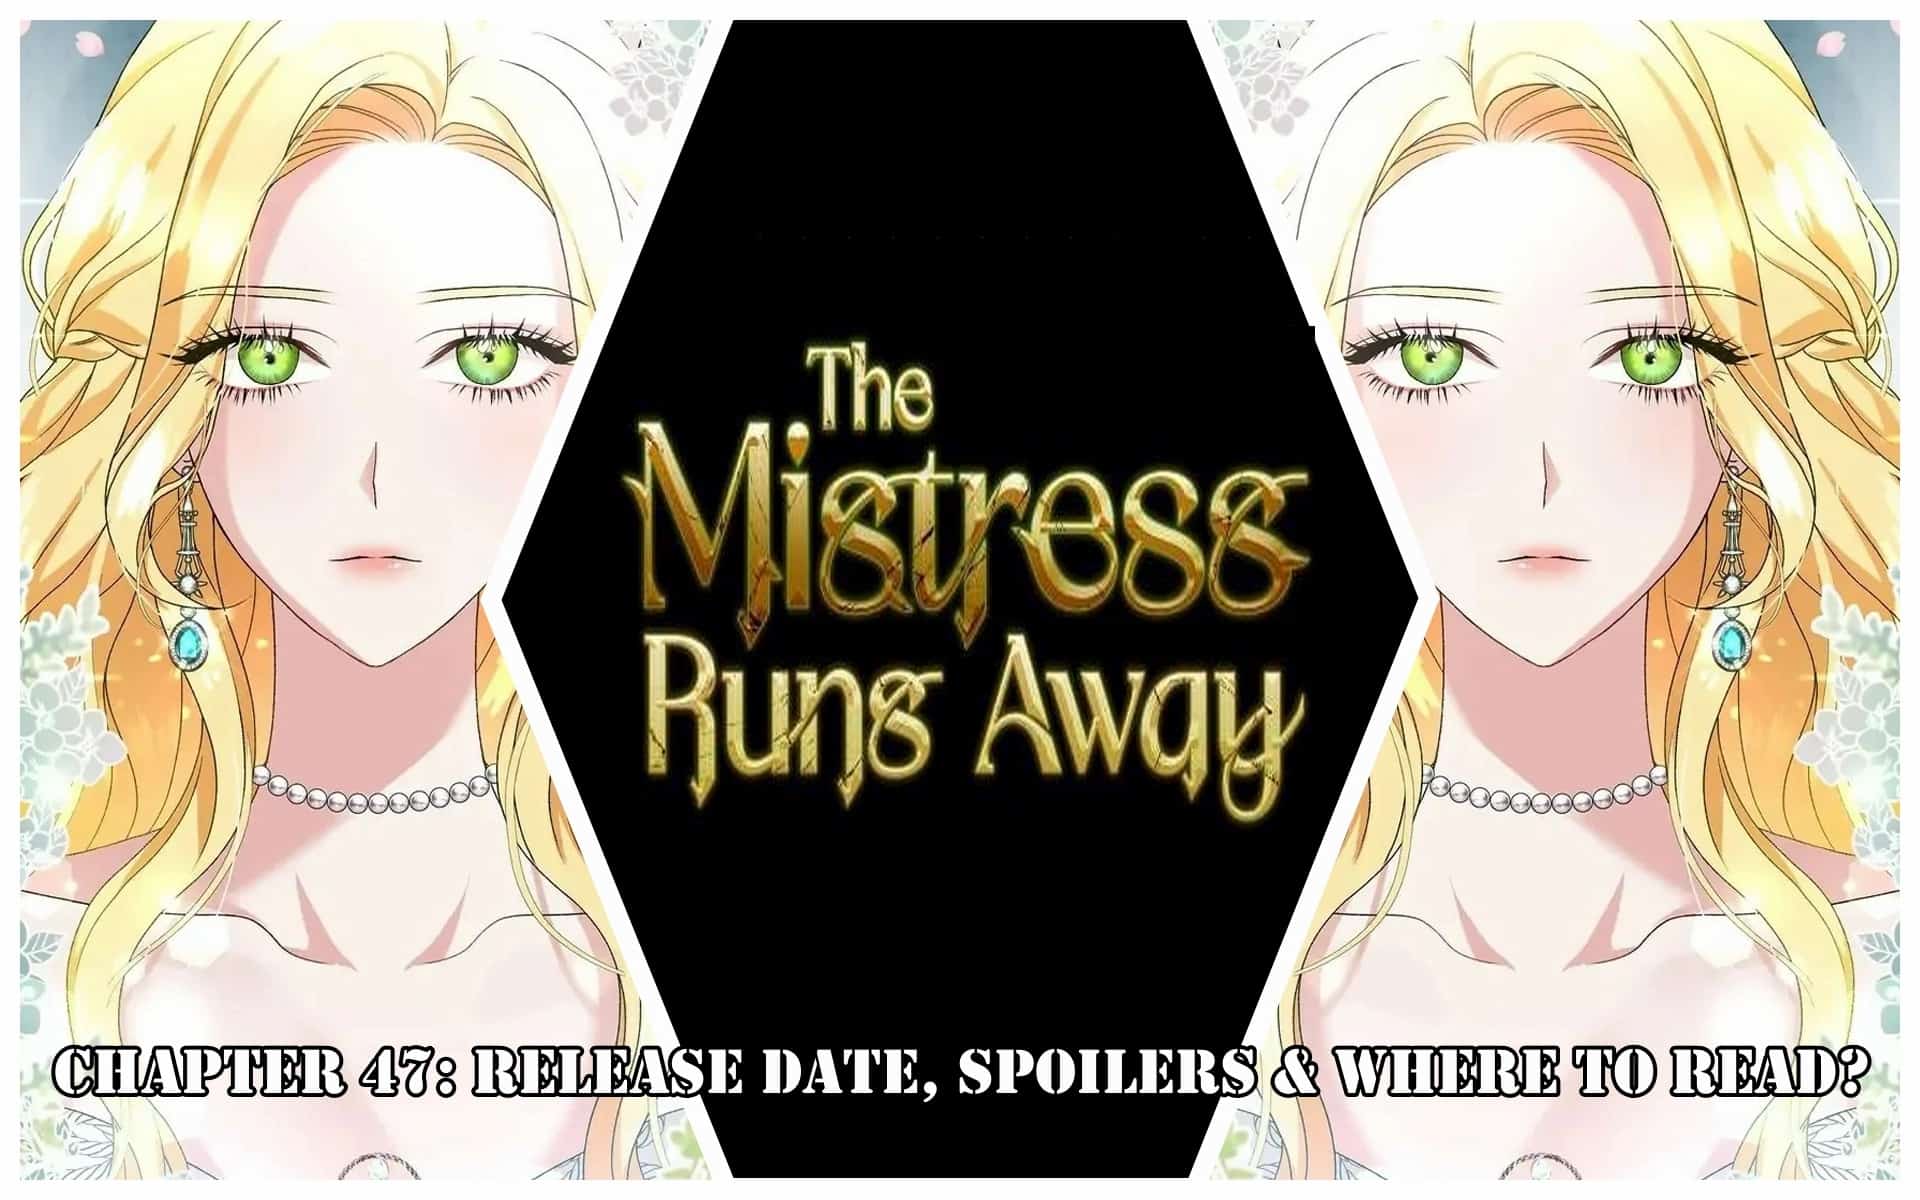 The Mistress Runs Away Chapter 47: Release Date, Spoilers & Where to Read?